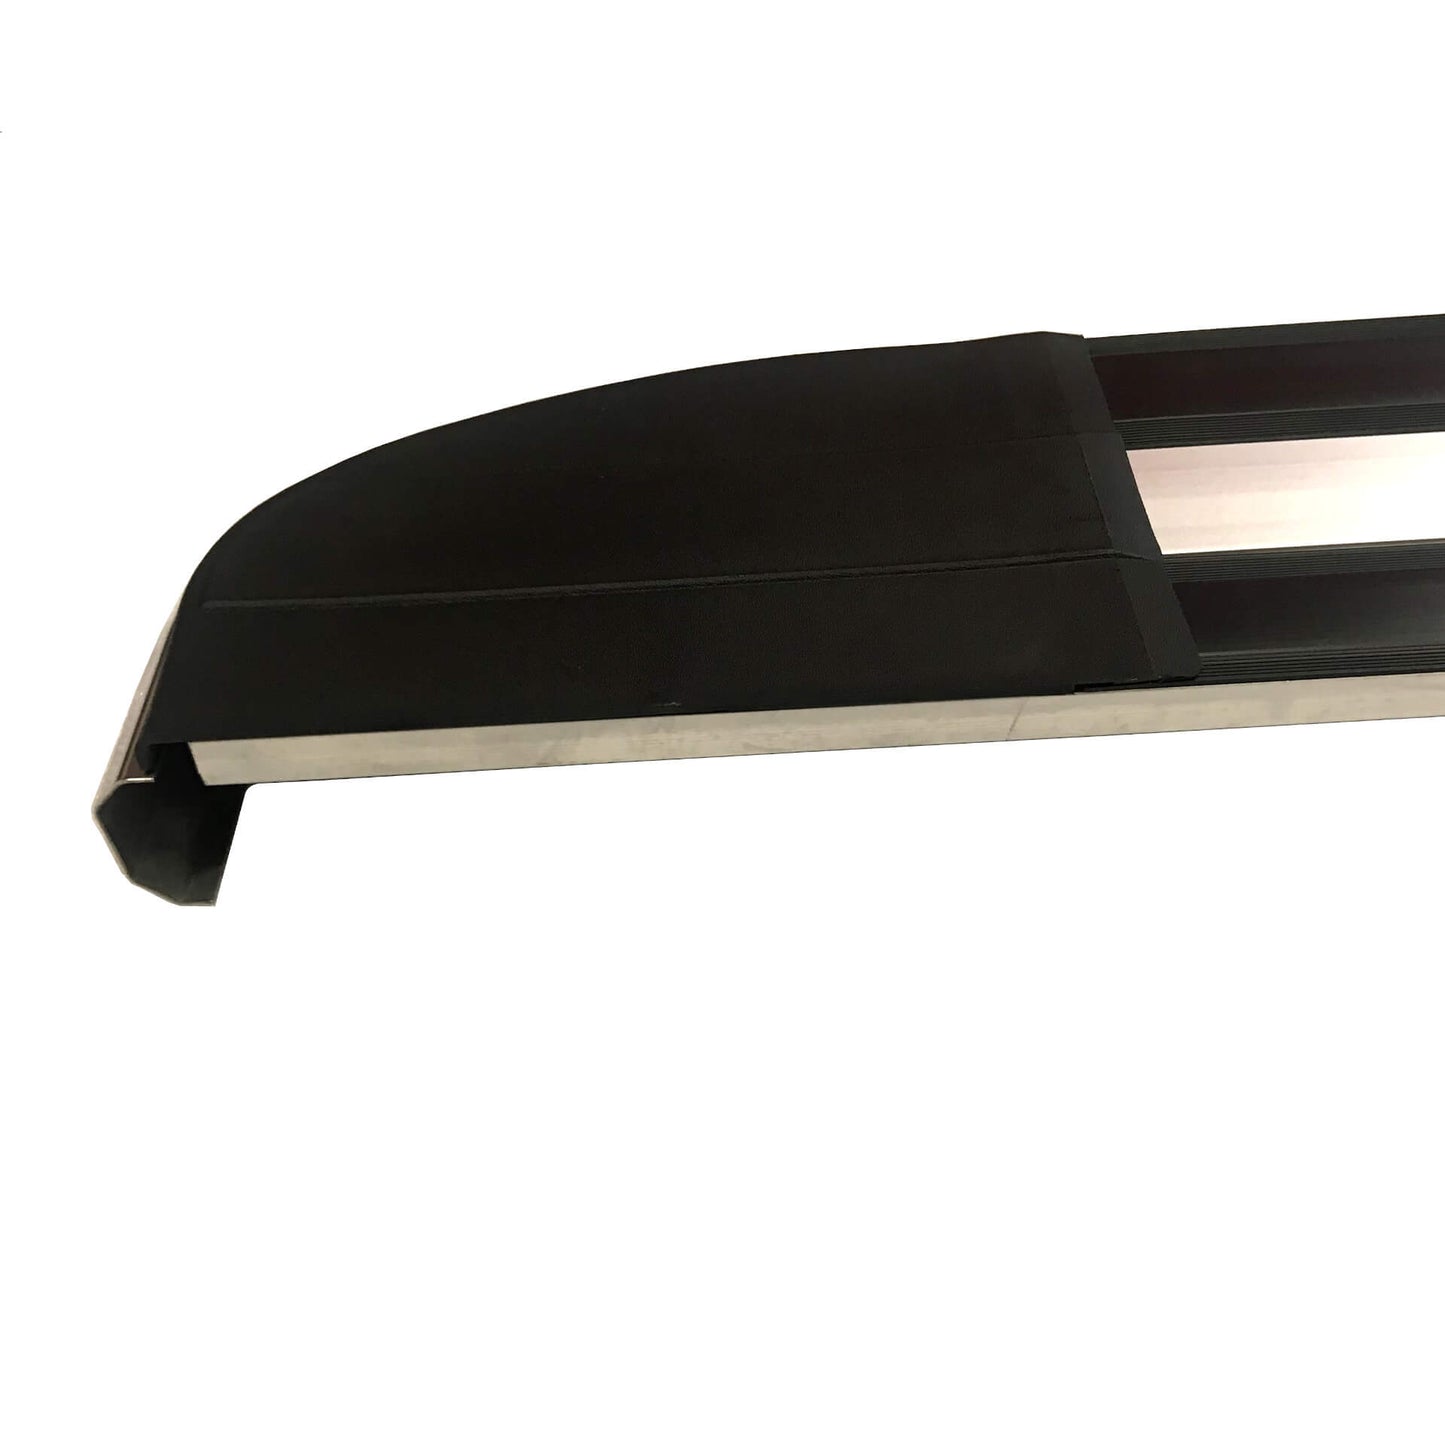 Panther Side Steps Running Boards for Range Rover Vogue 2013-2022 (L405) -  - sold by Direct4x4